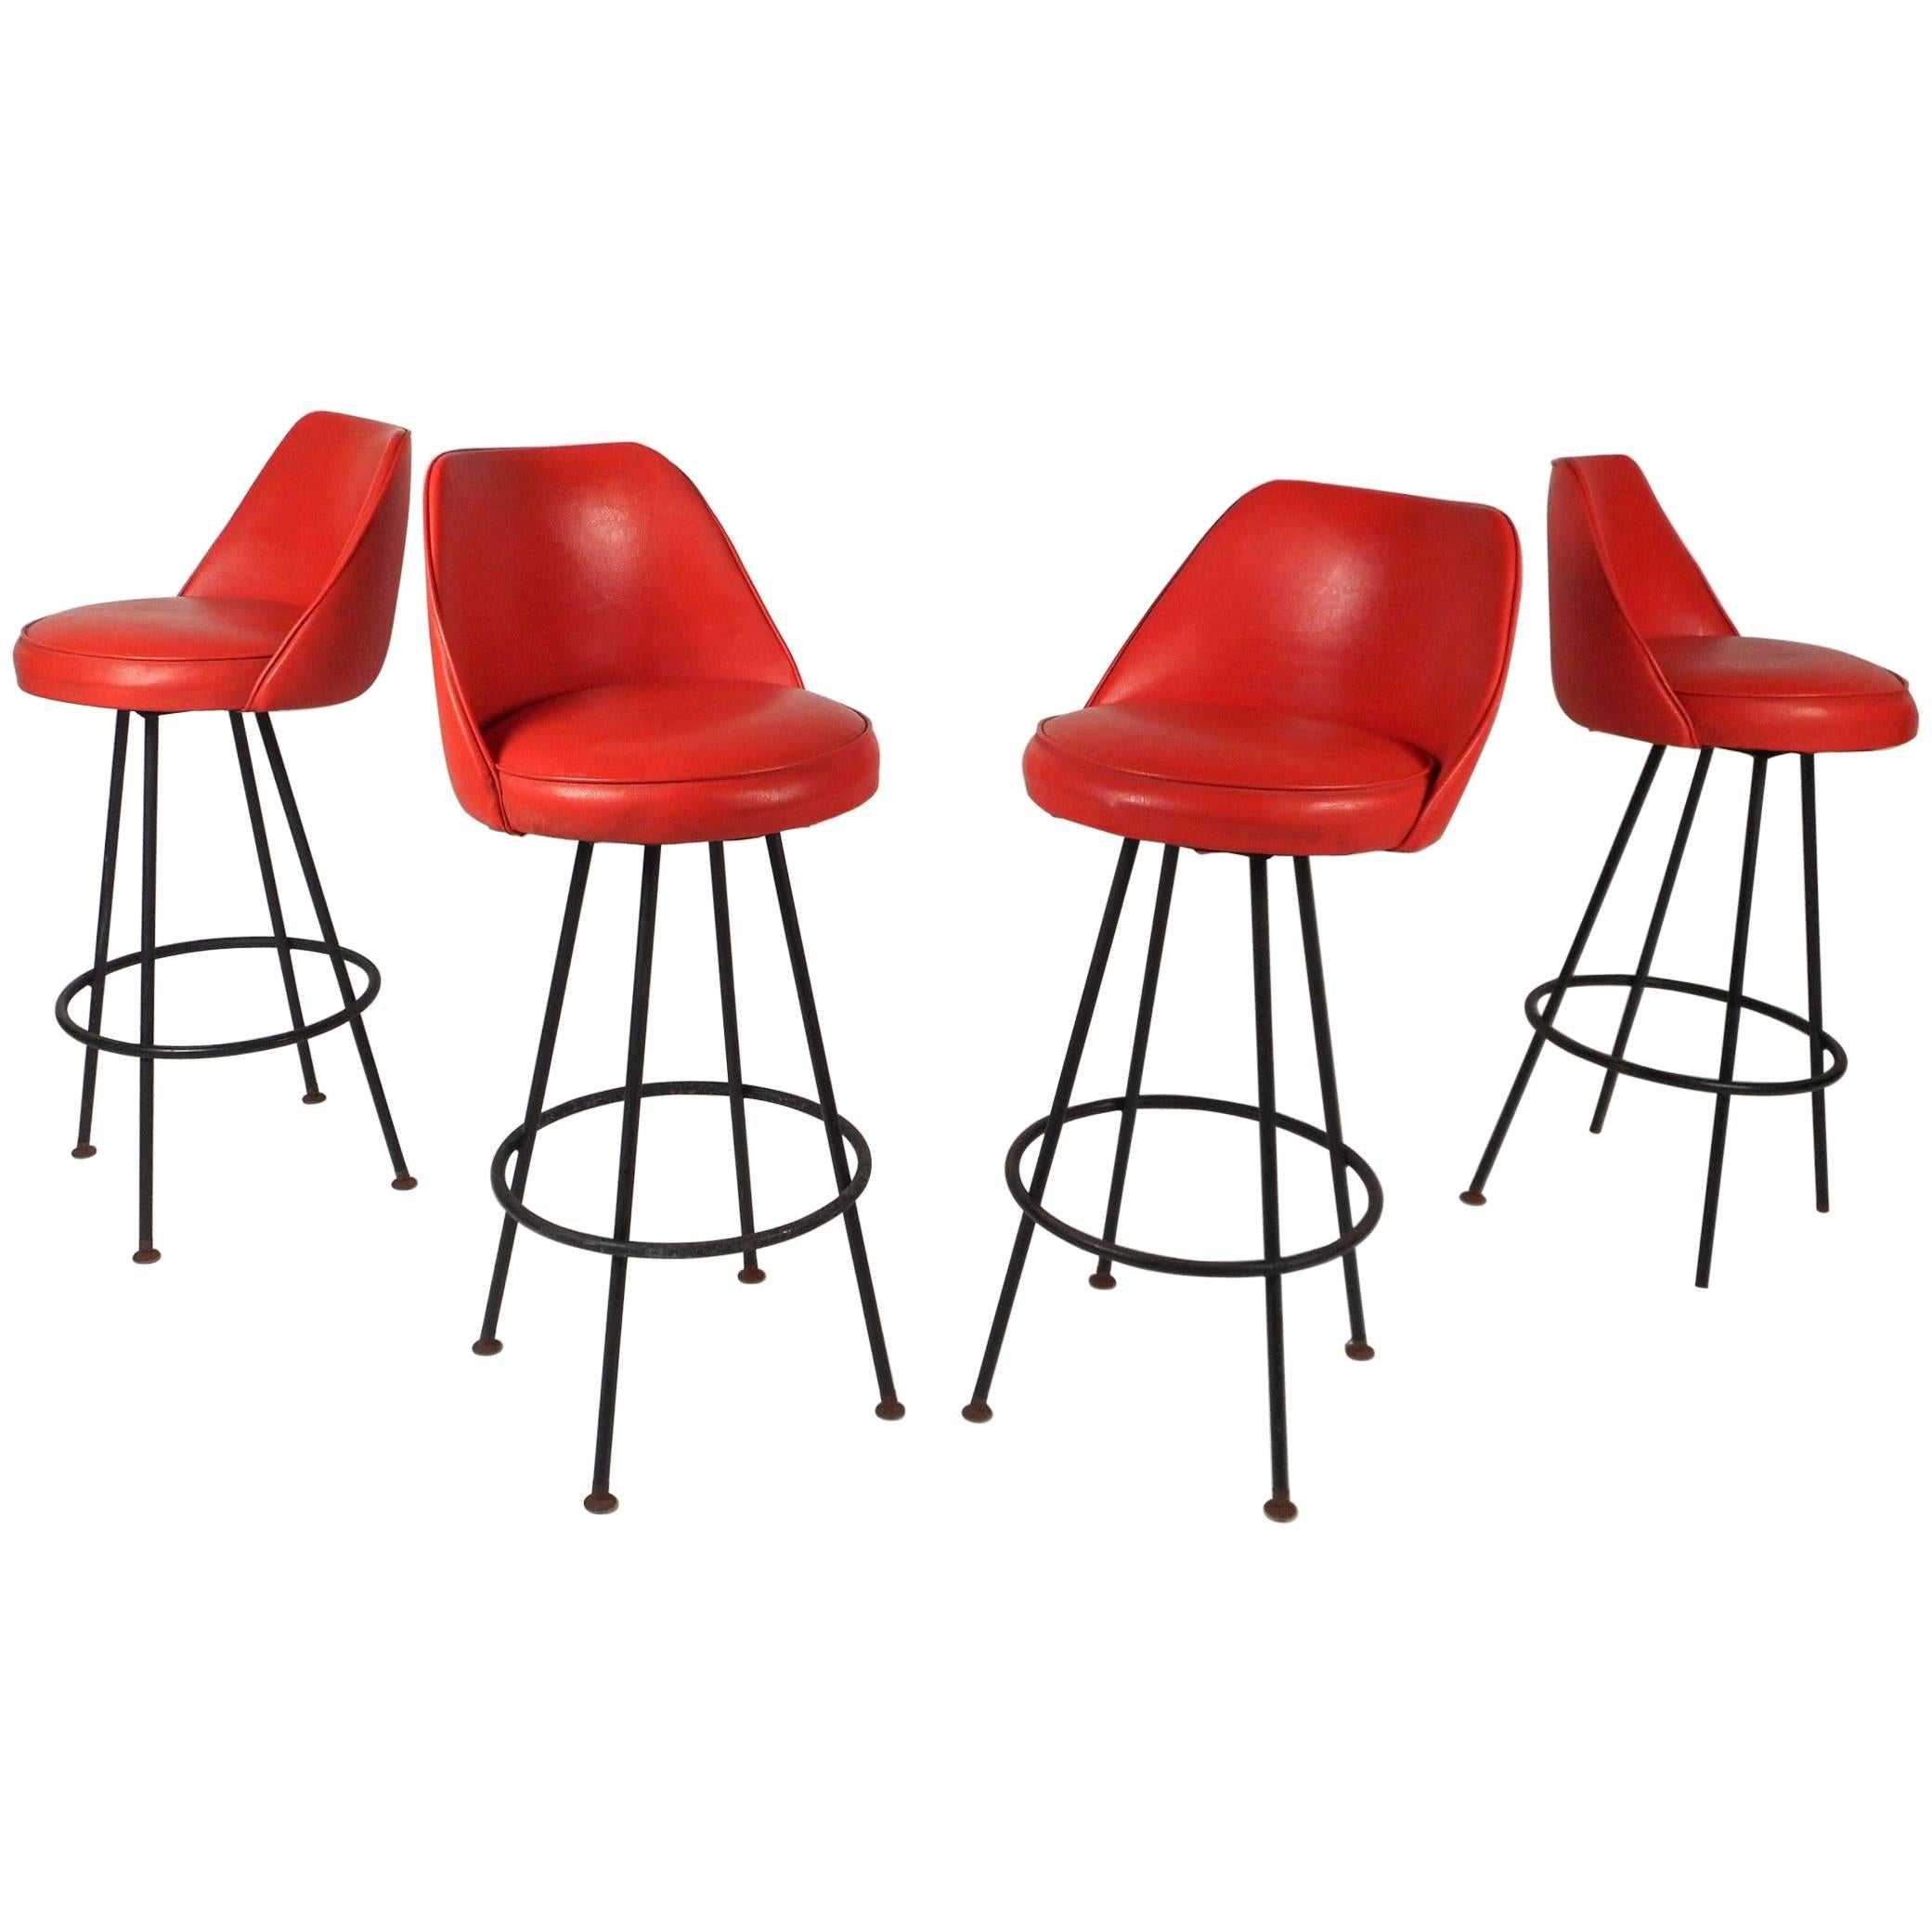 Set of Four Mid-Century Modern Bar Stools by Admiral Chrome Corporation